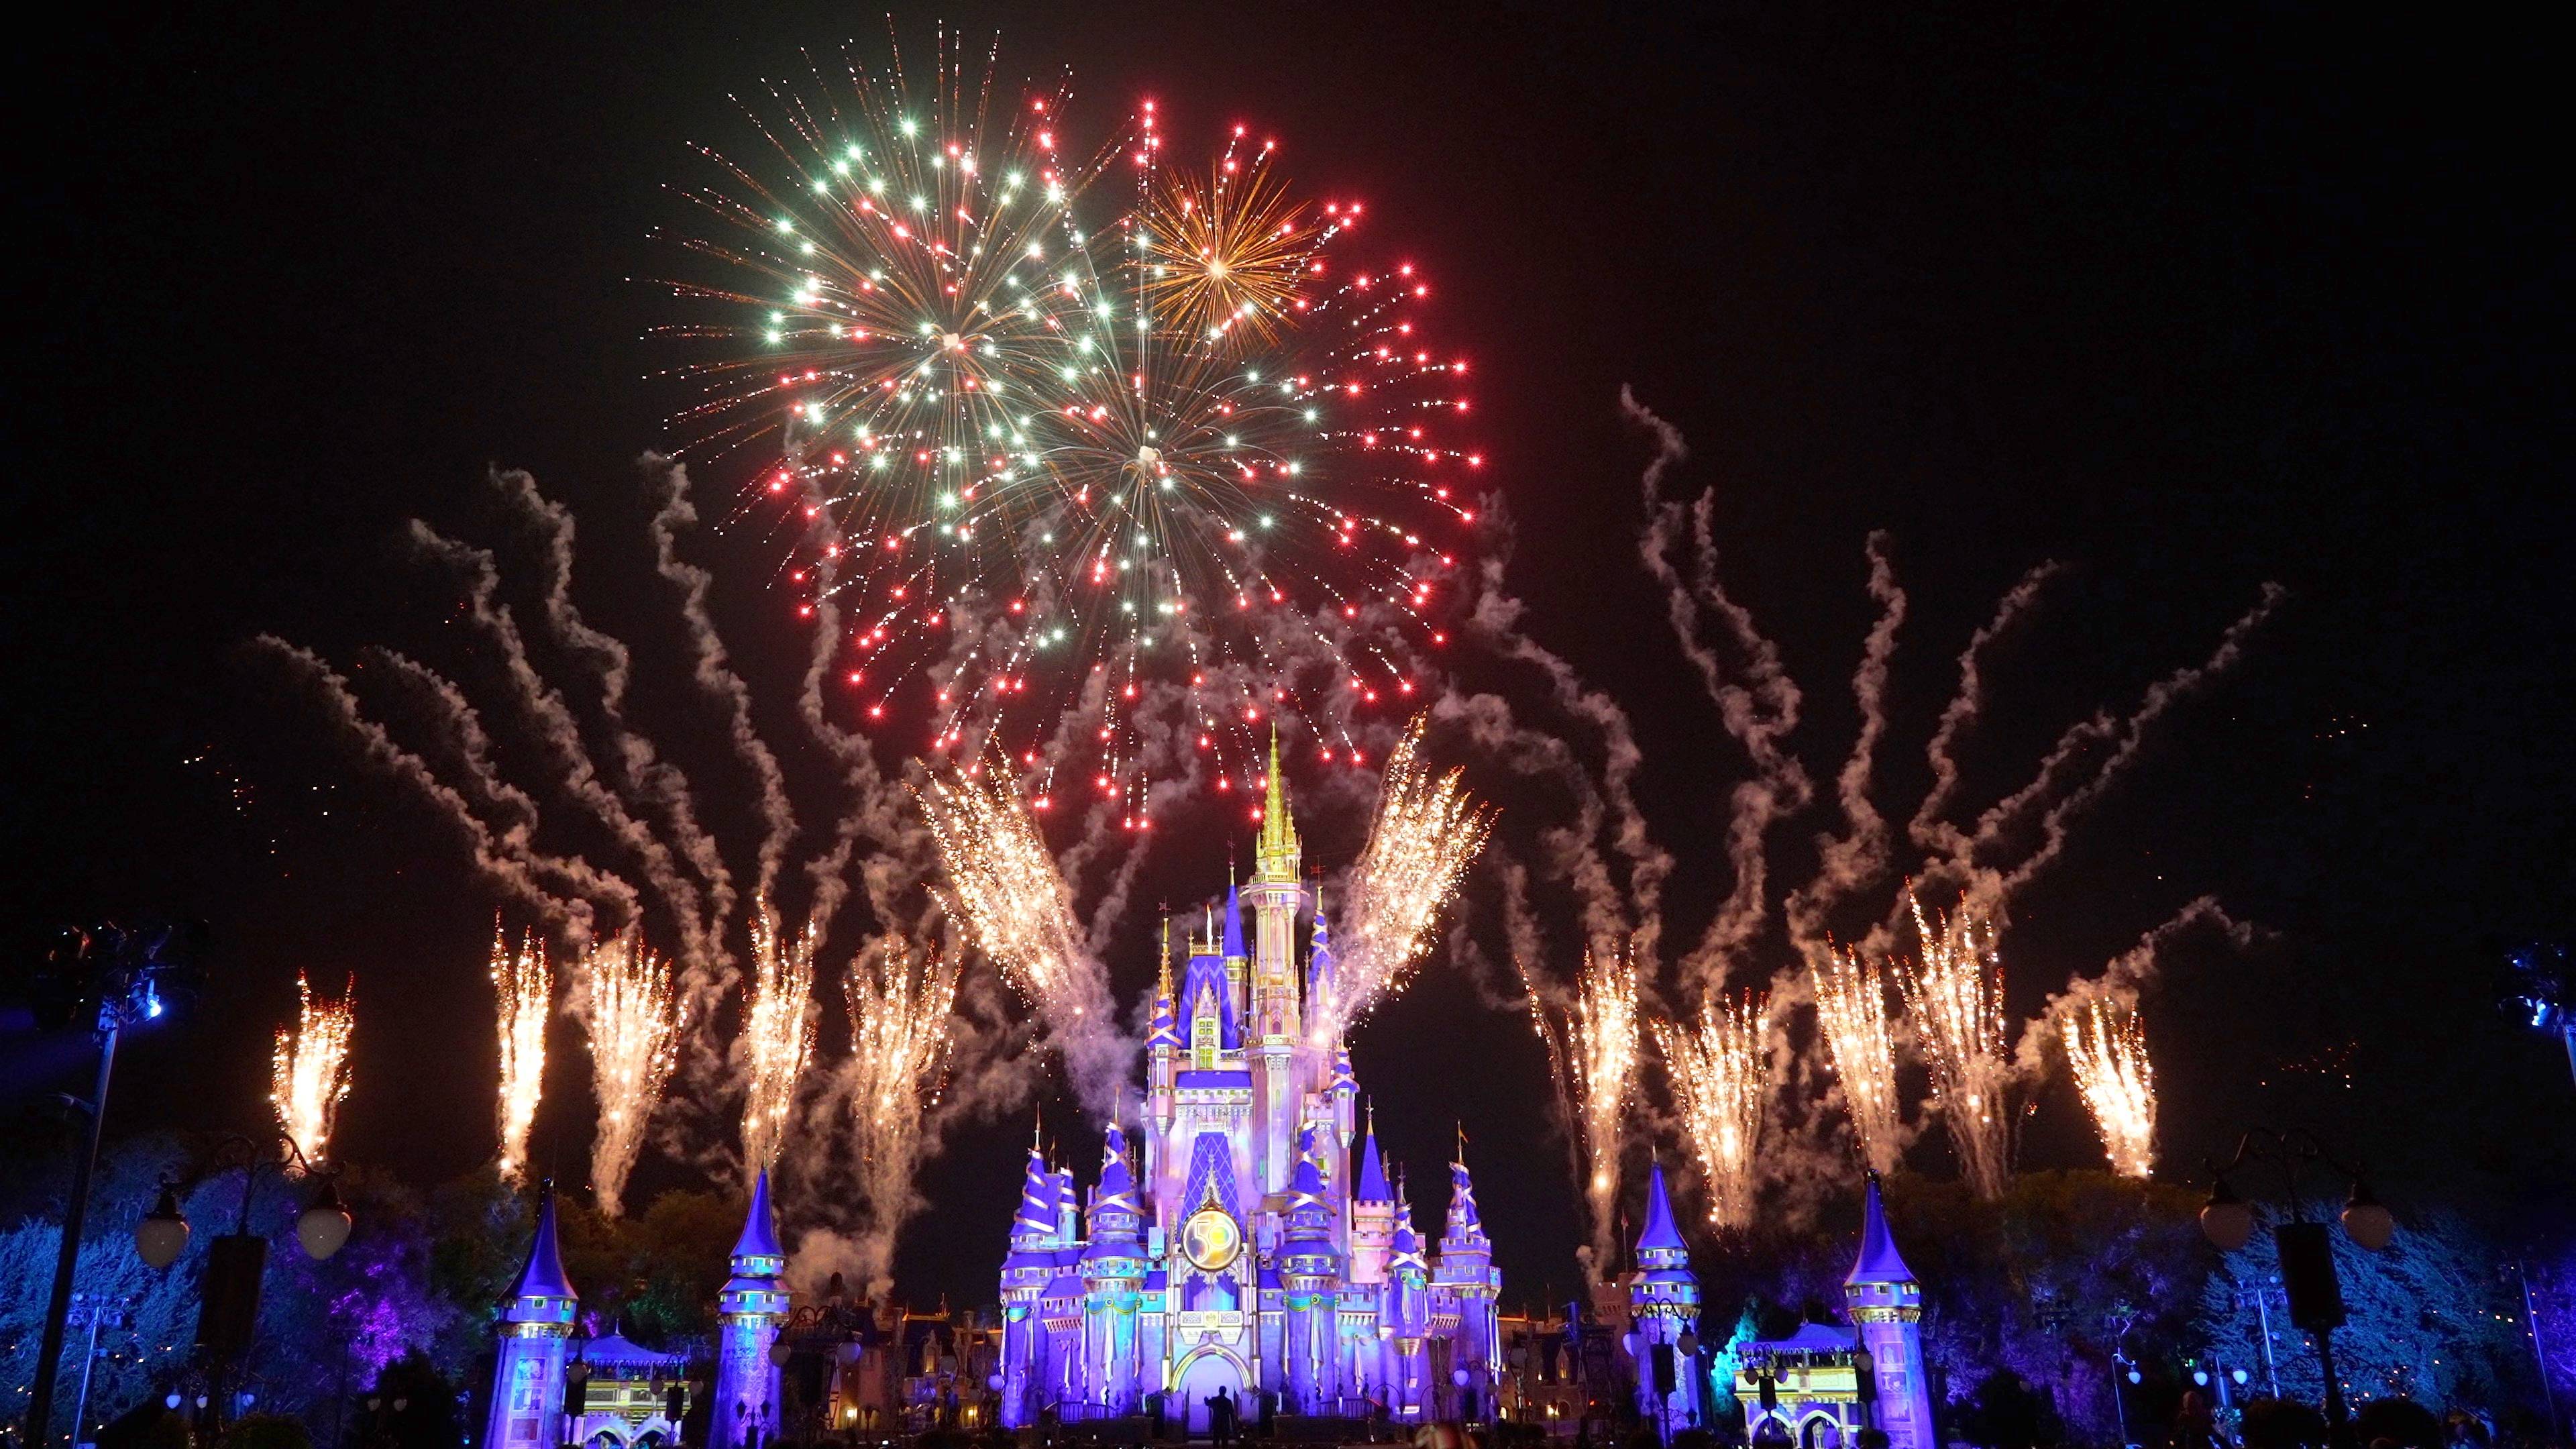 VIDEO - Minnie's Wonderful Christmastime Fireworks show debuts for 2021 at Magic Kingdom